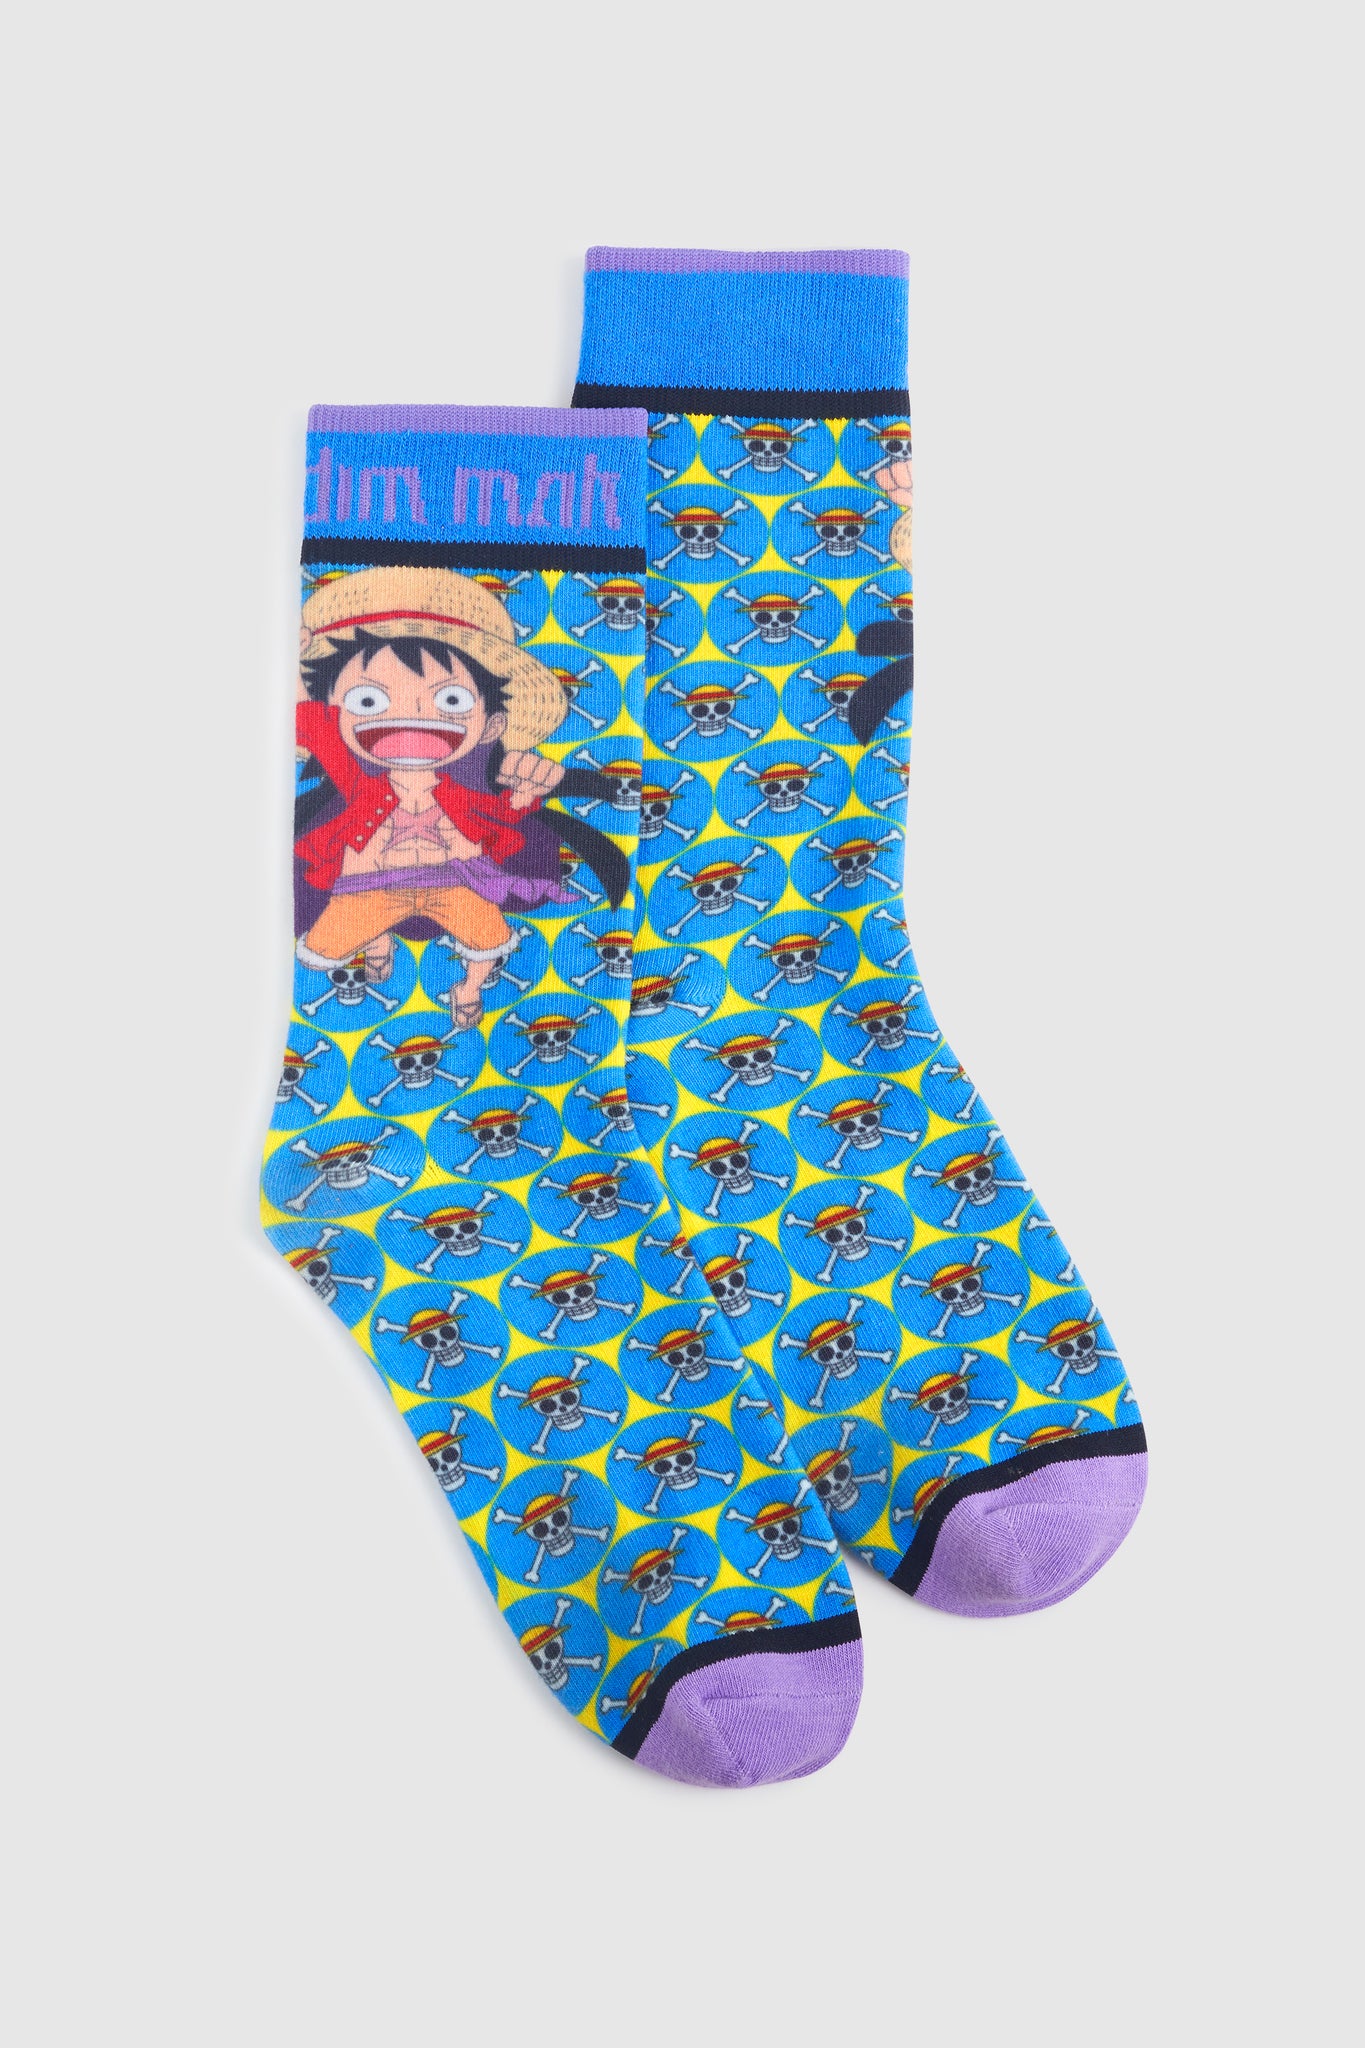 CAPSLAB One Piece Cotton City Socks | Skull and Luffy